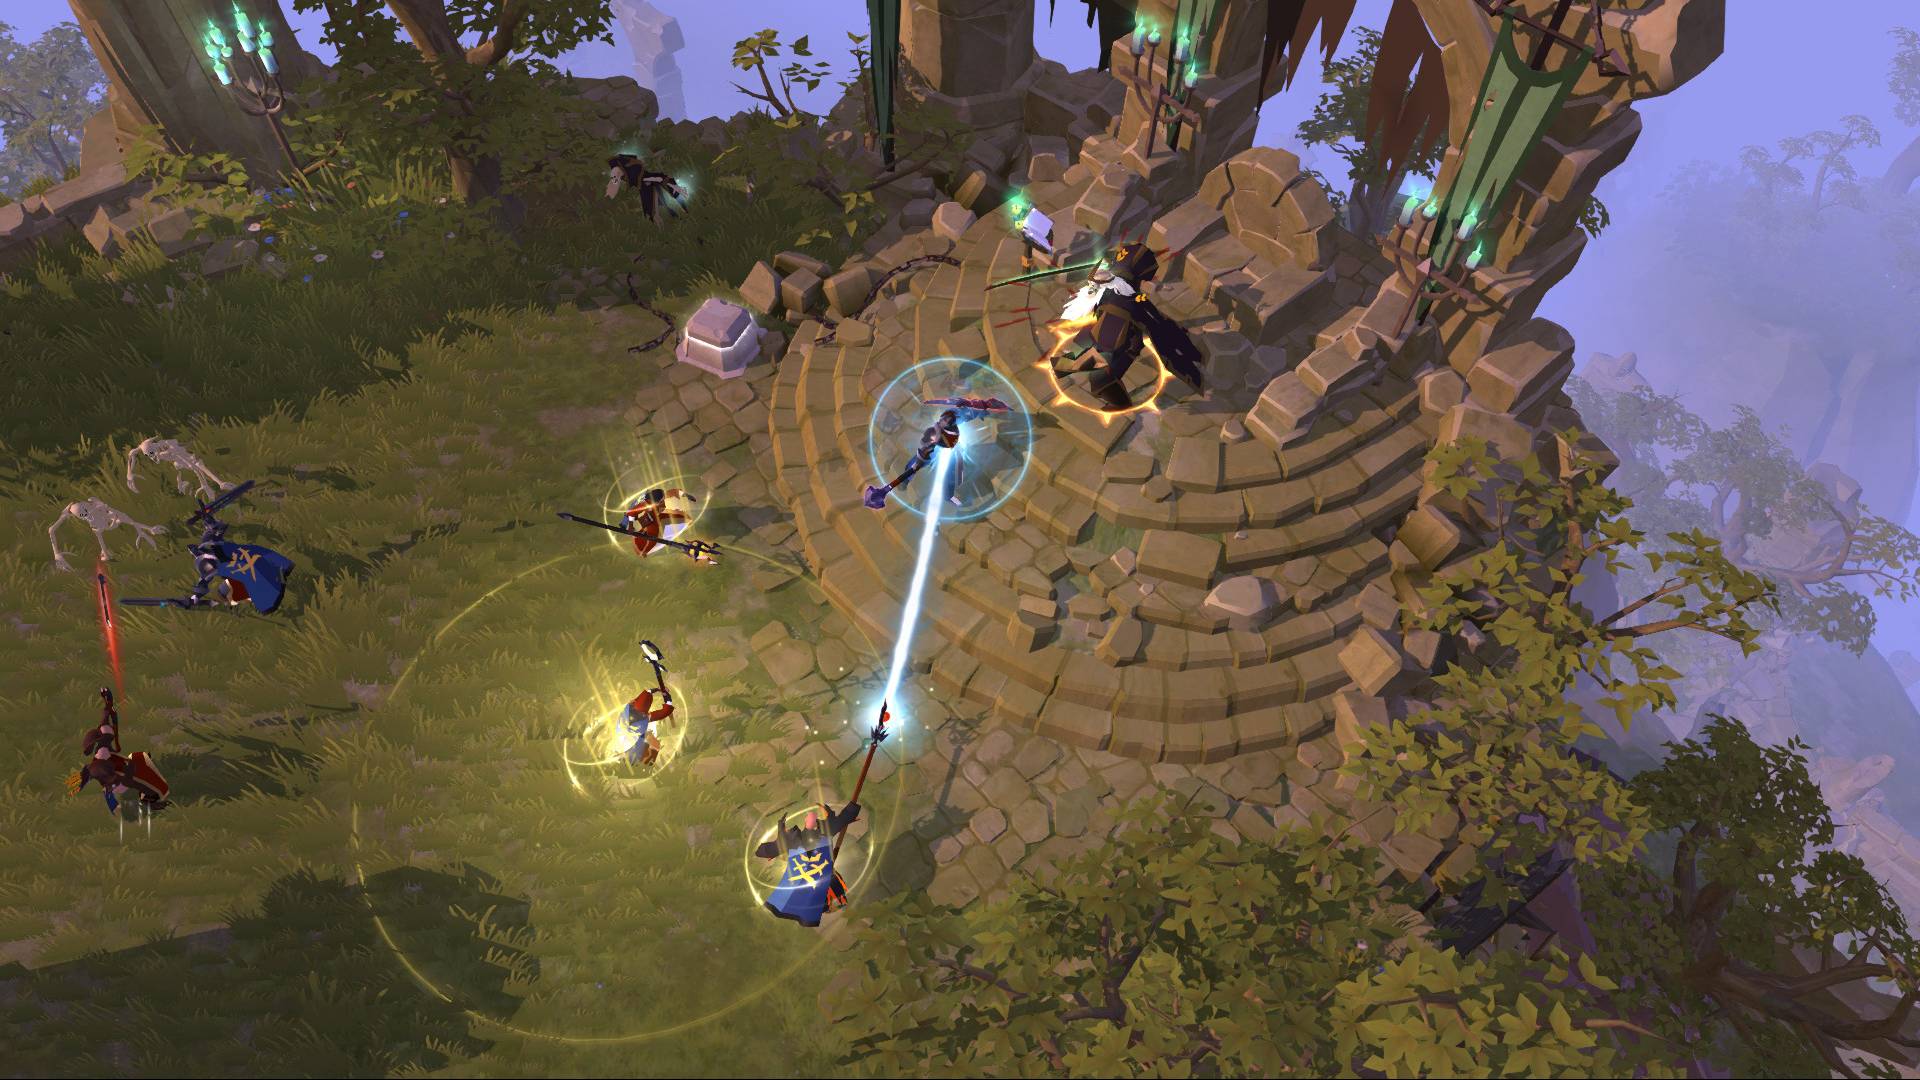 Best games for laptop: Albion Online. Image shows magic users doing battle near an alter.